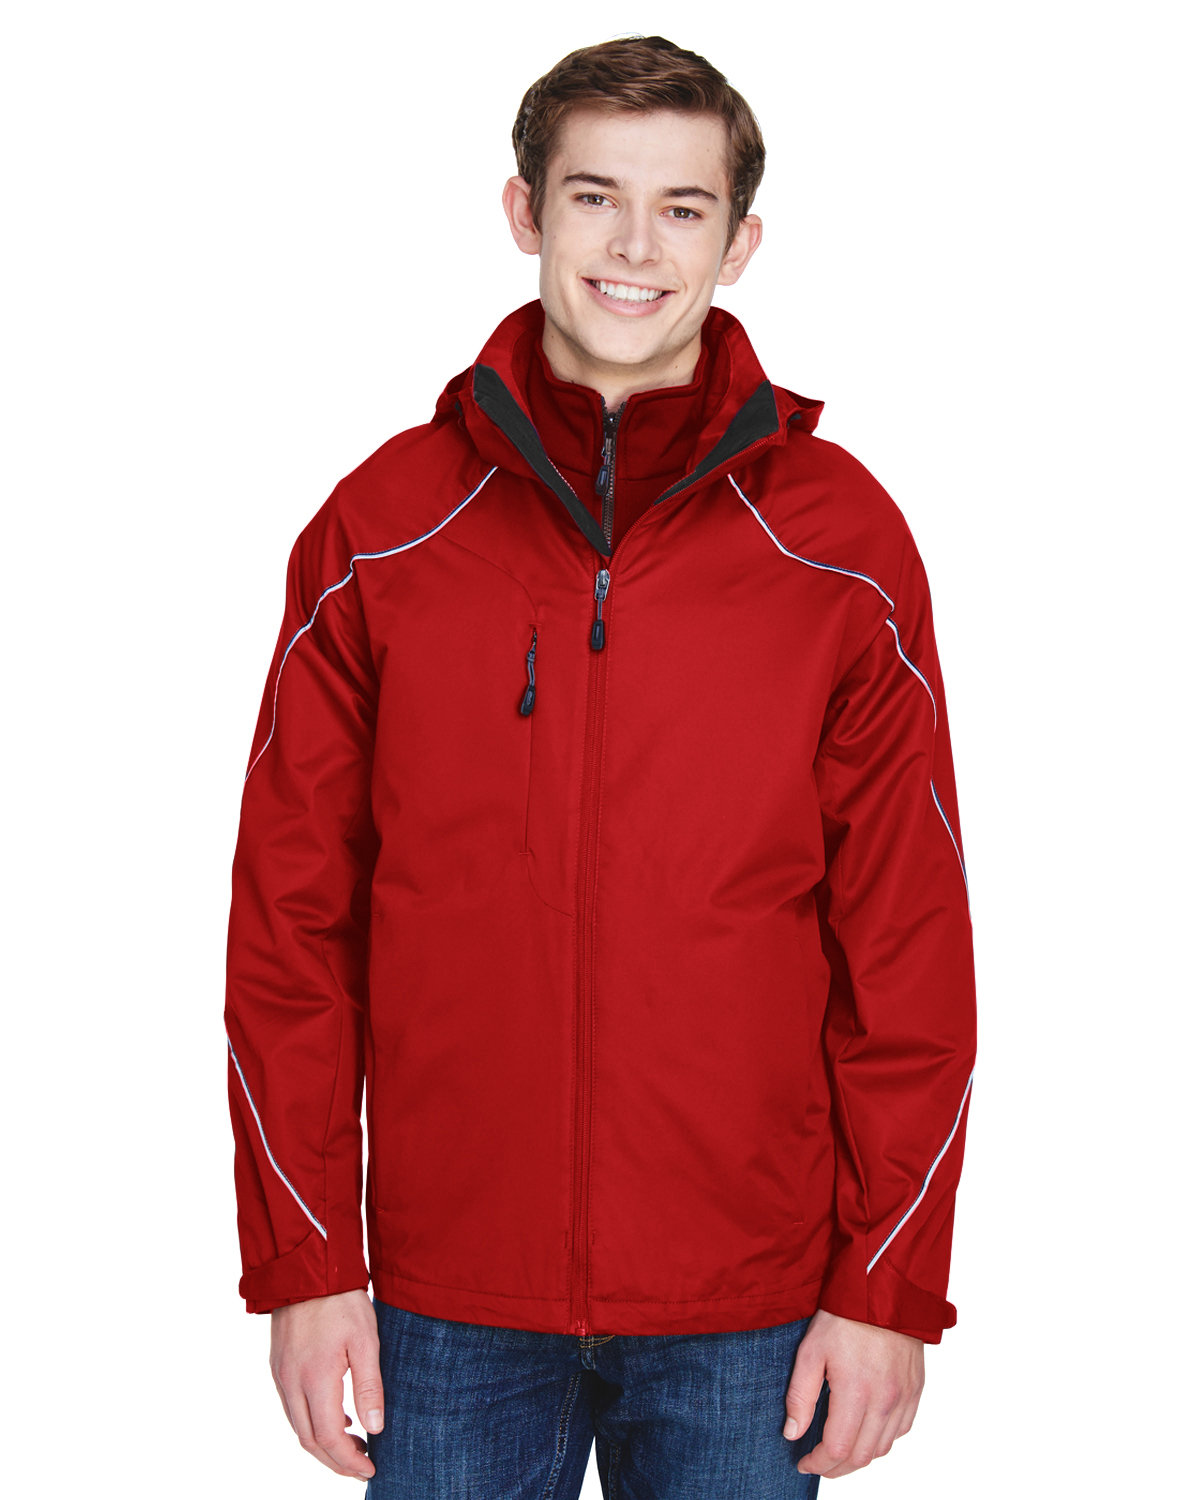 North End Men's Angle 3-in-1 Jacket with Bonded Fleece Liner CLASSIC RED 